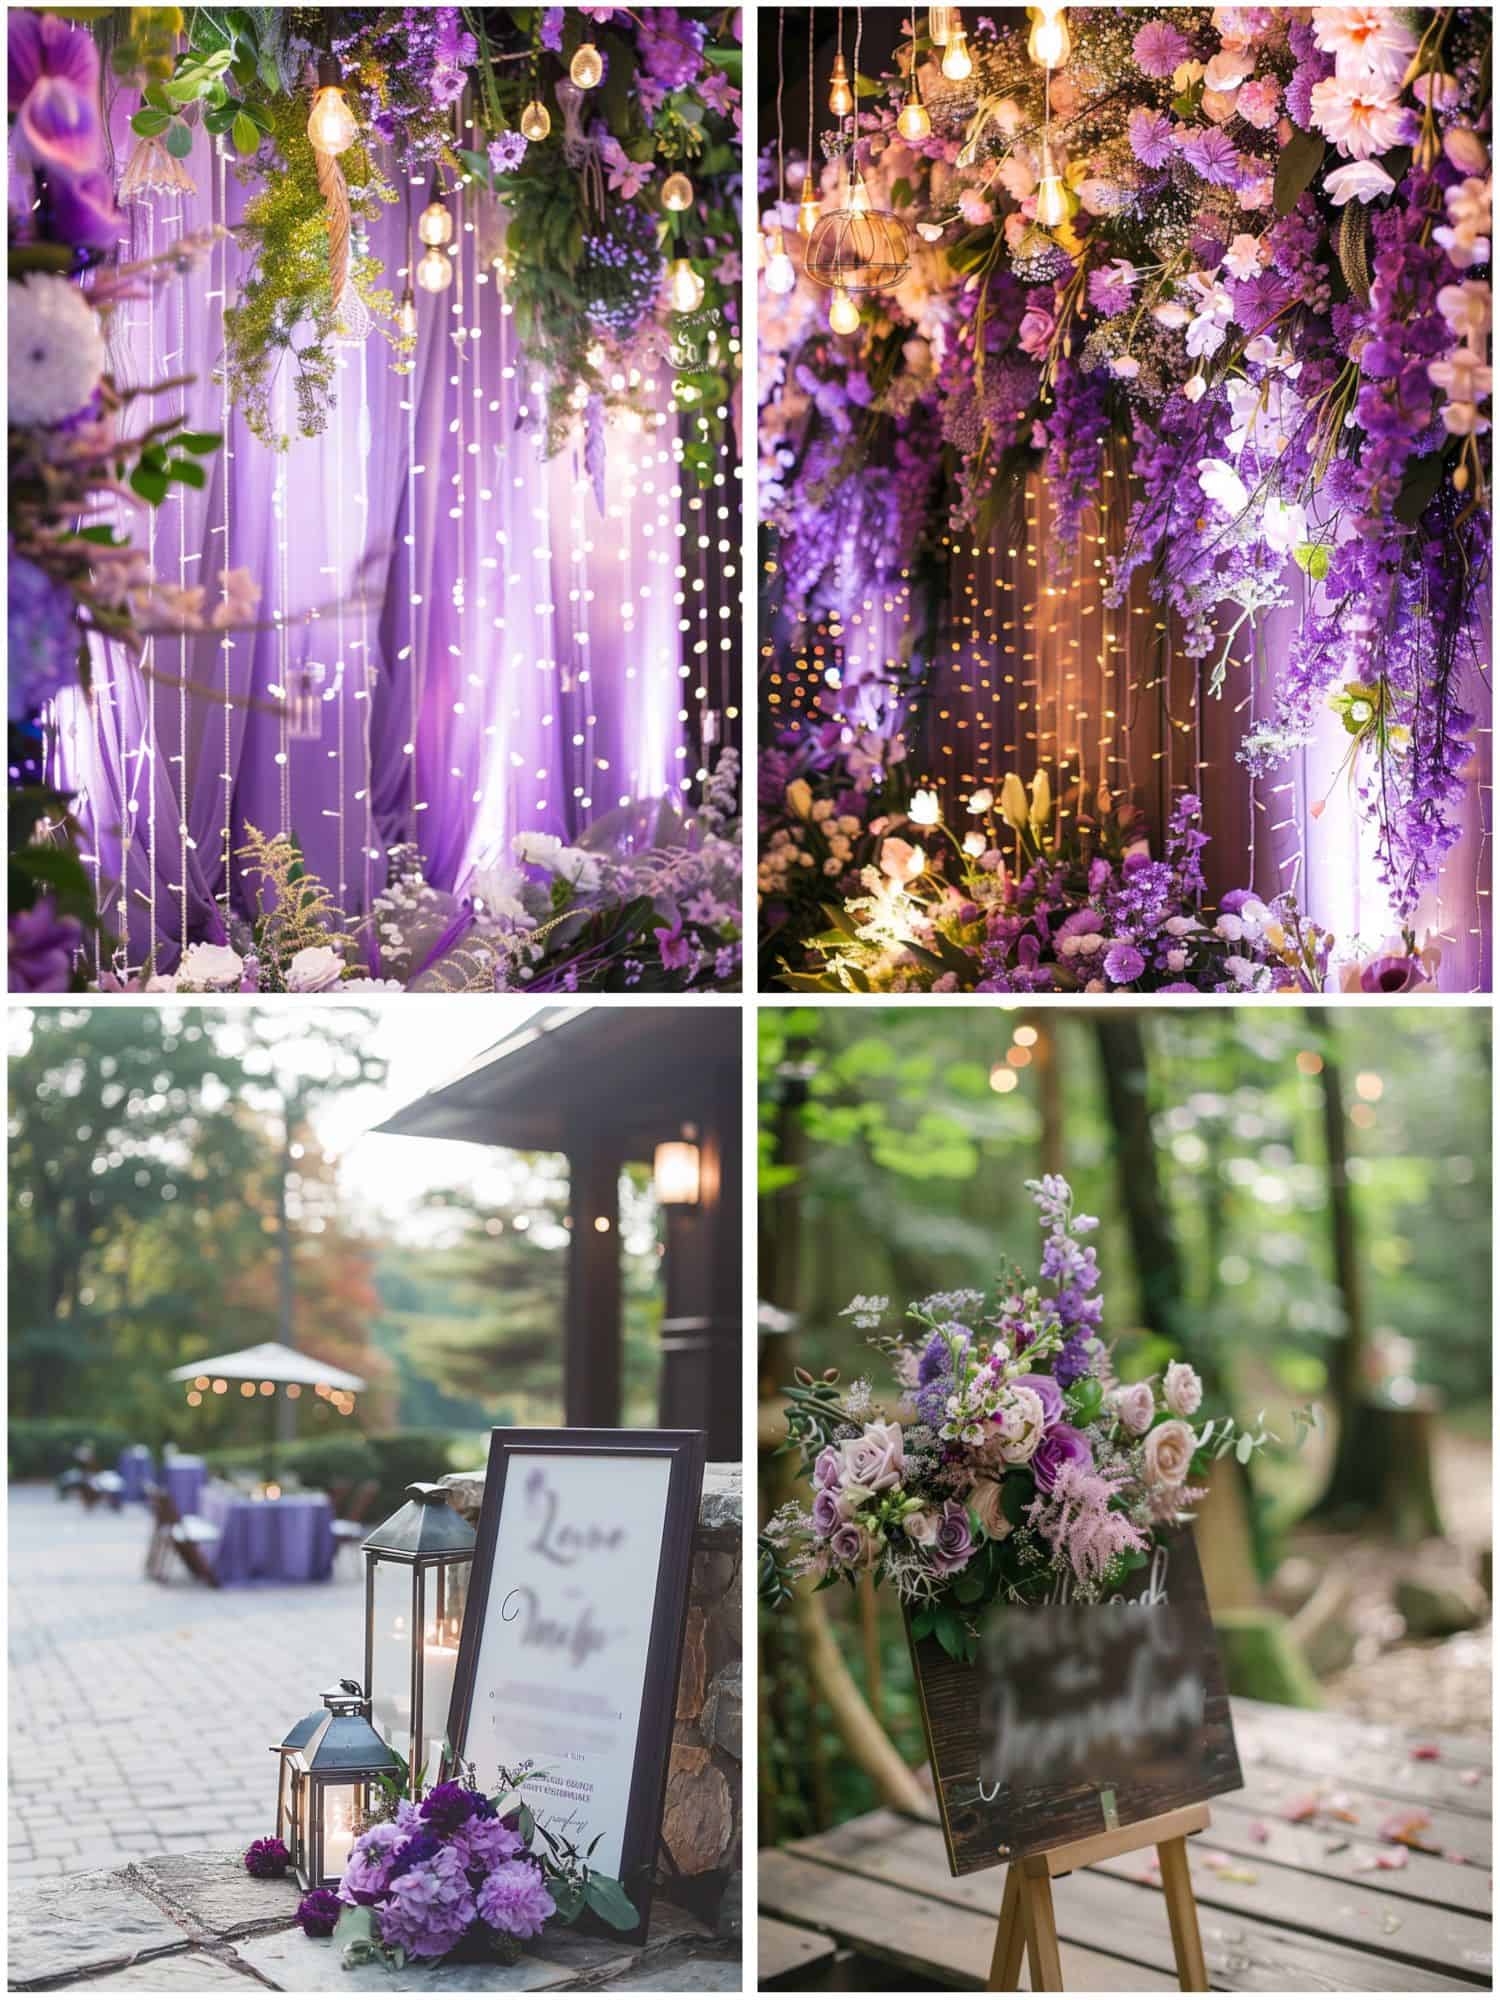 whimsical touches to purple and white decor